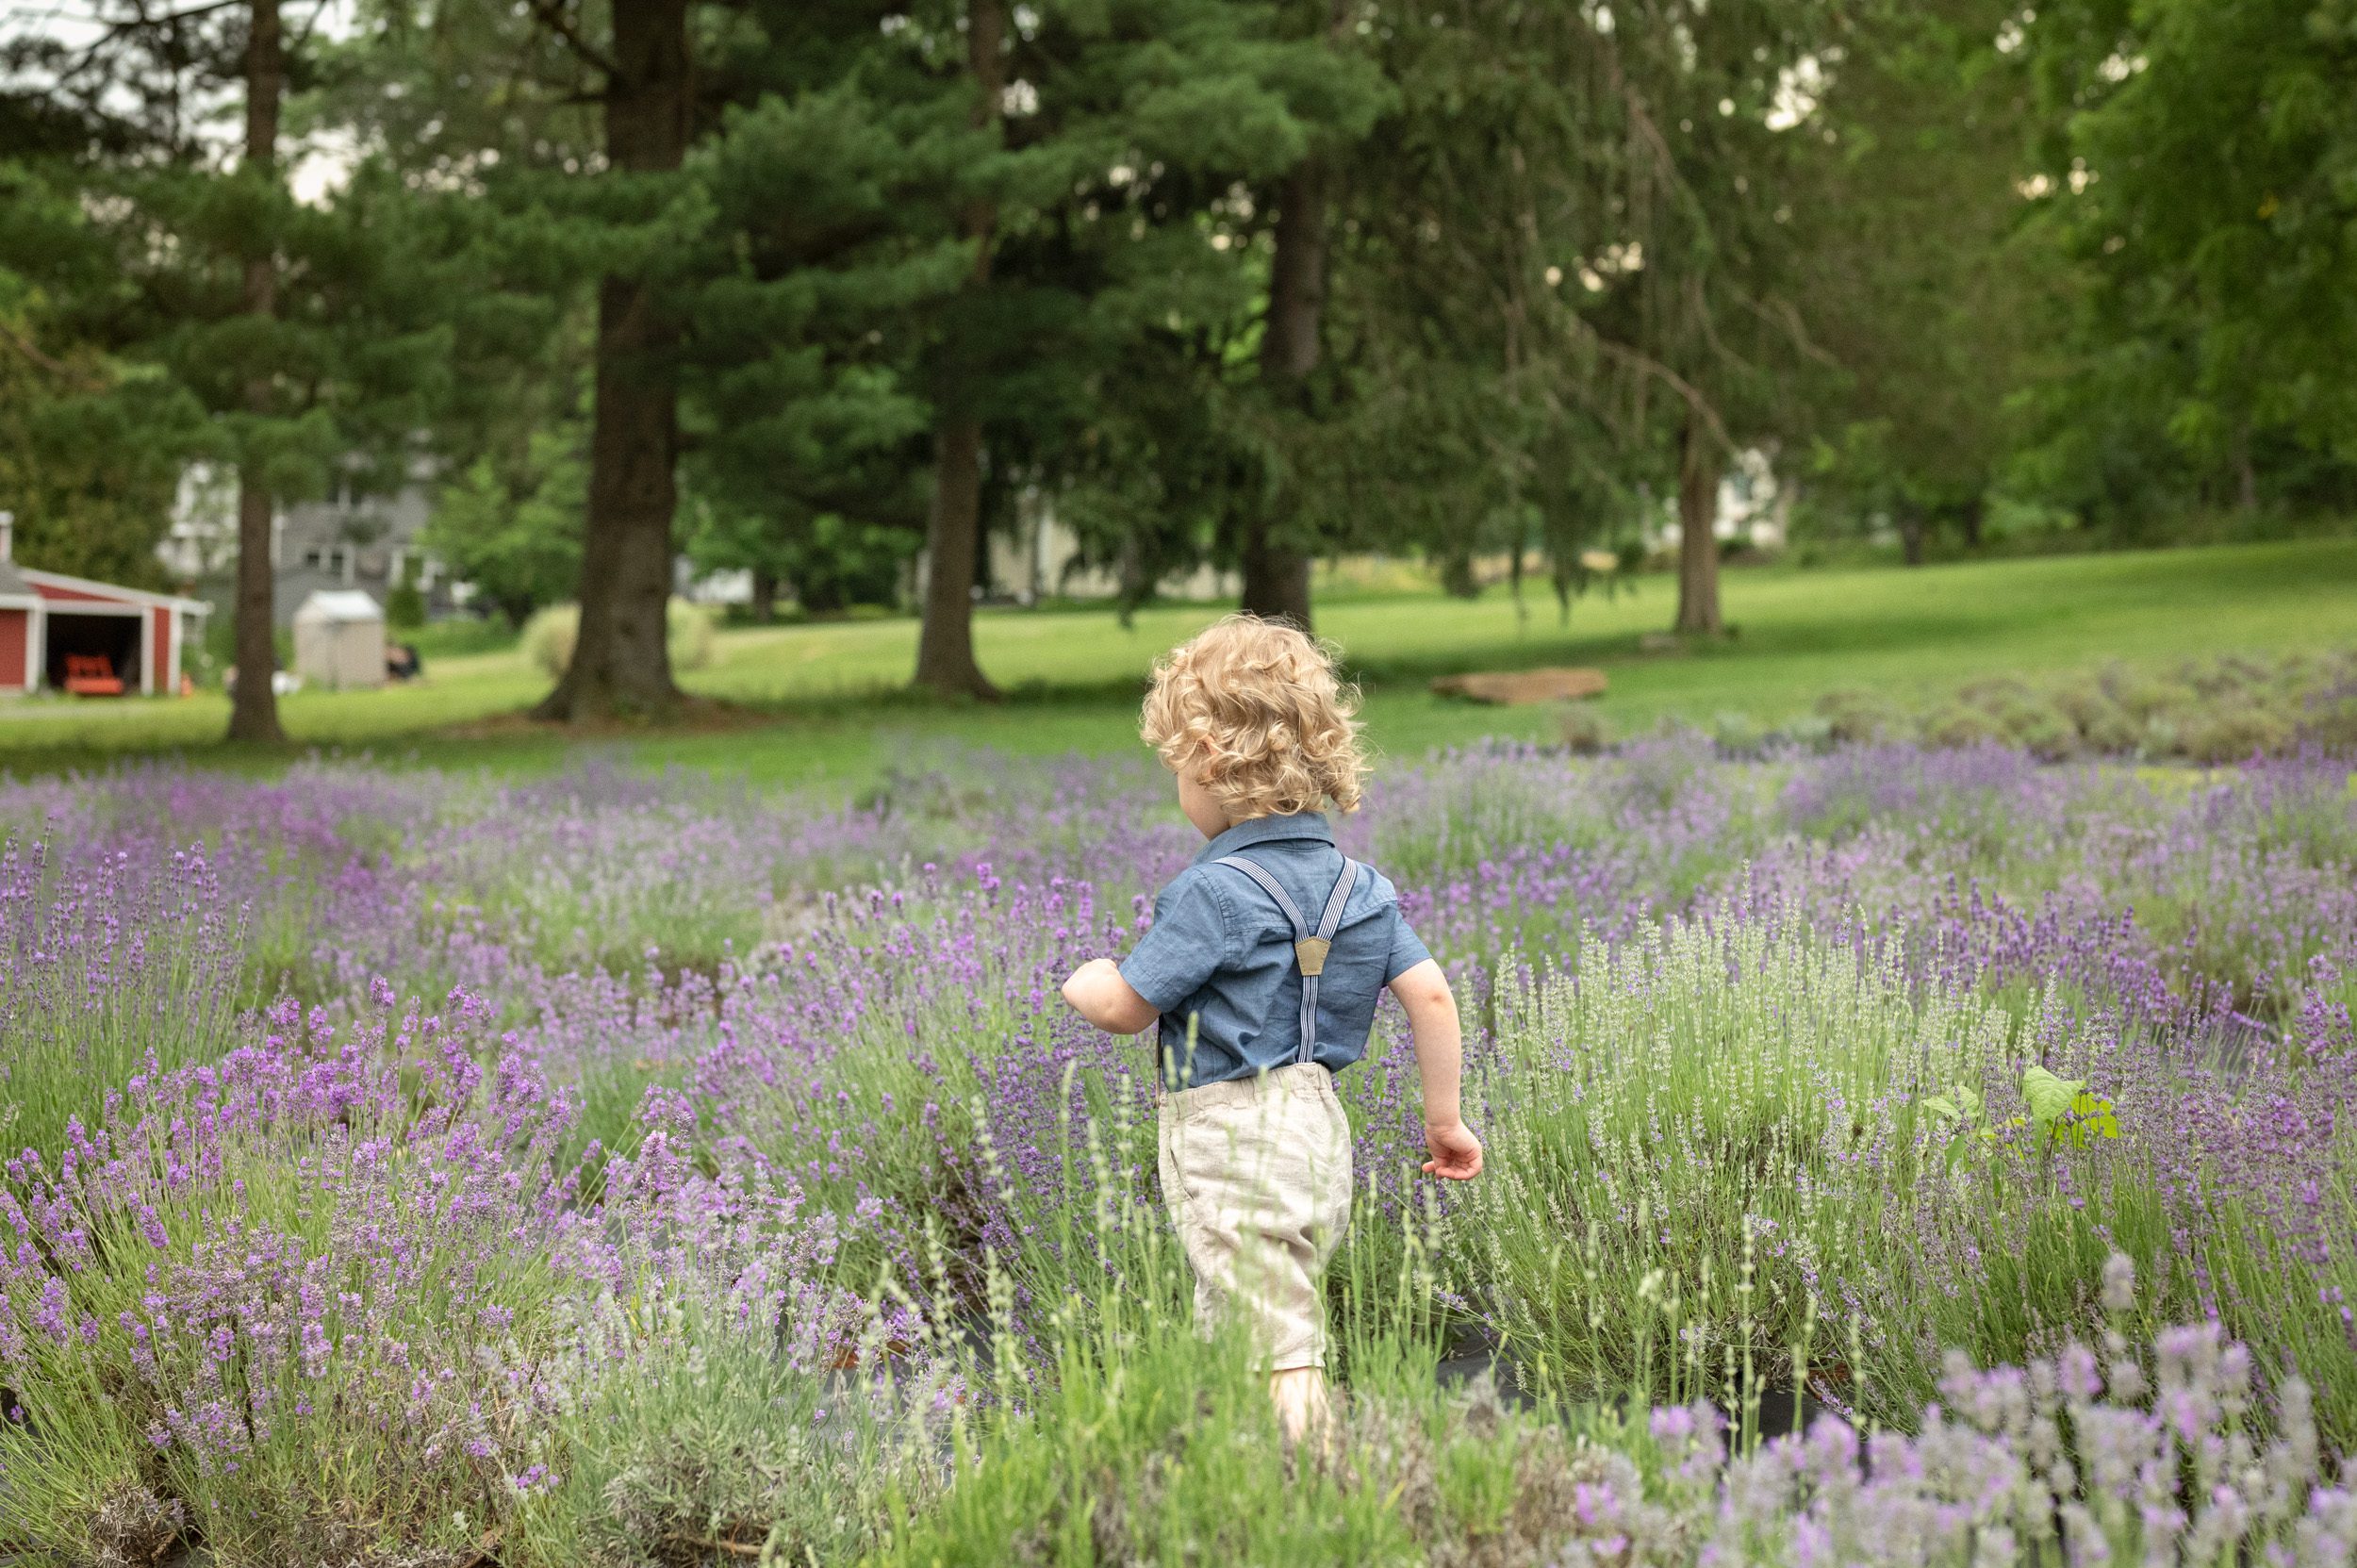 a little boy with blond curly hair marching away from the camera through a field of lavender in full bloom during a family photoshoot